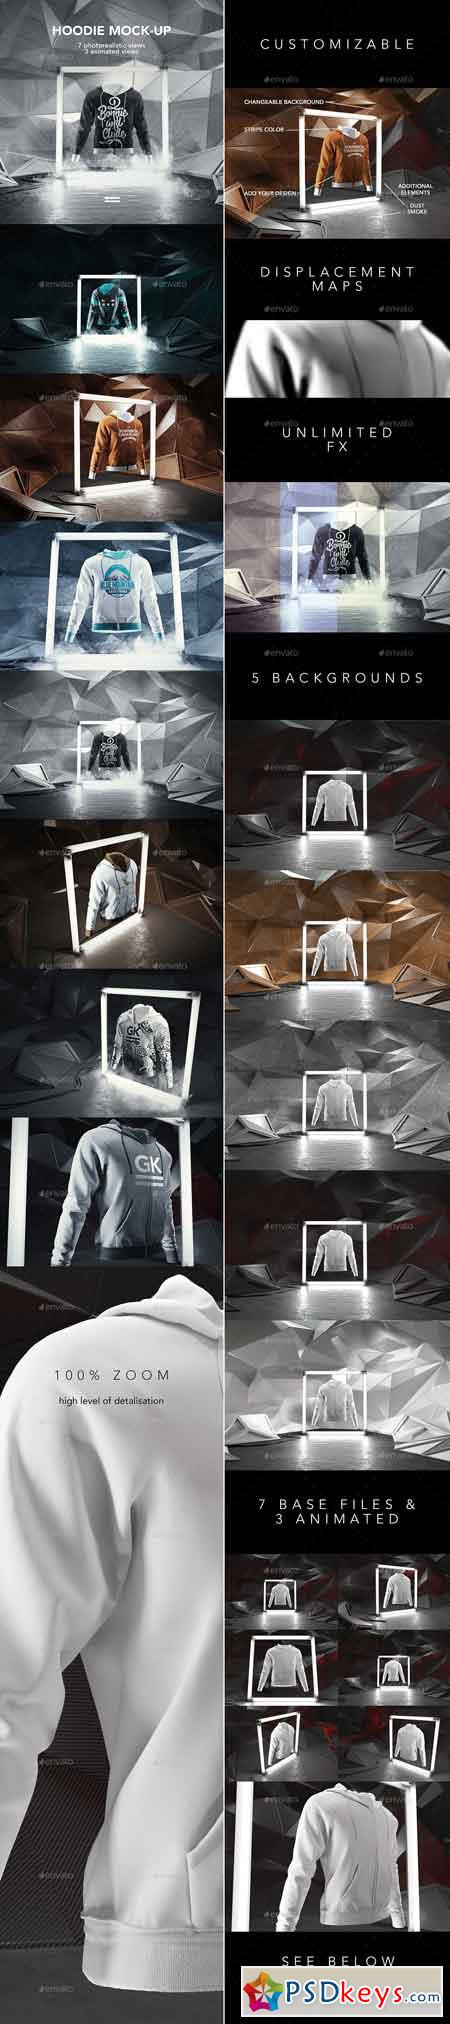 Download Hoodie Mock-up Animated Mock-up 16582339 » Free Download Photoshop Vector Stock image Via ...